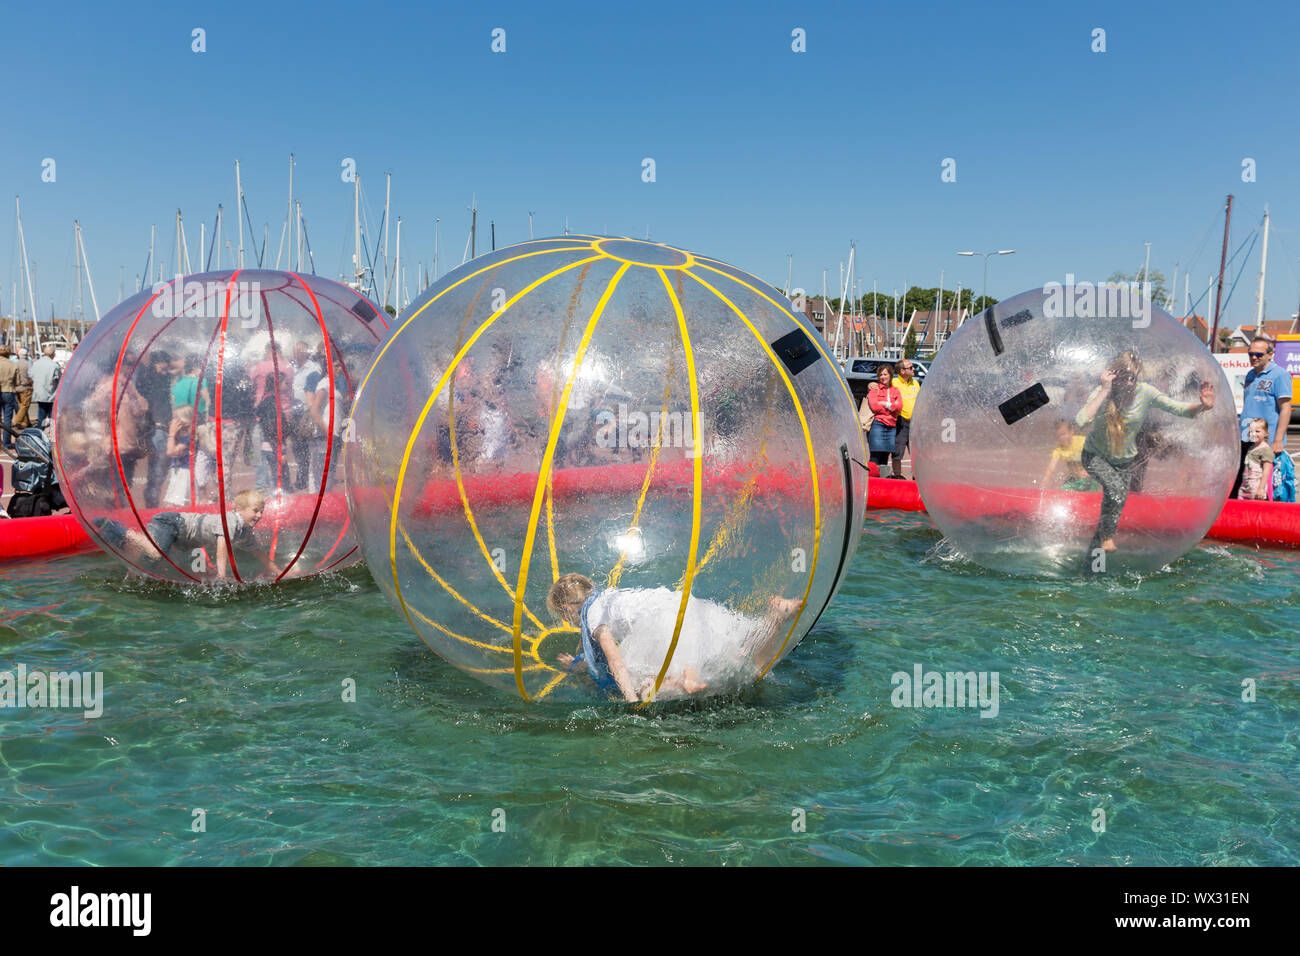 Children have fun inside plastic balloons on the water during a fishing fare Stock Photo